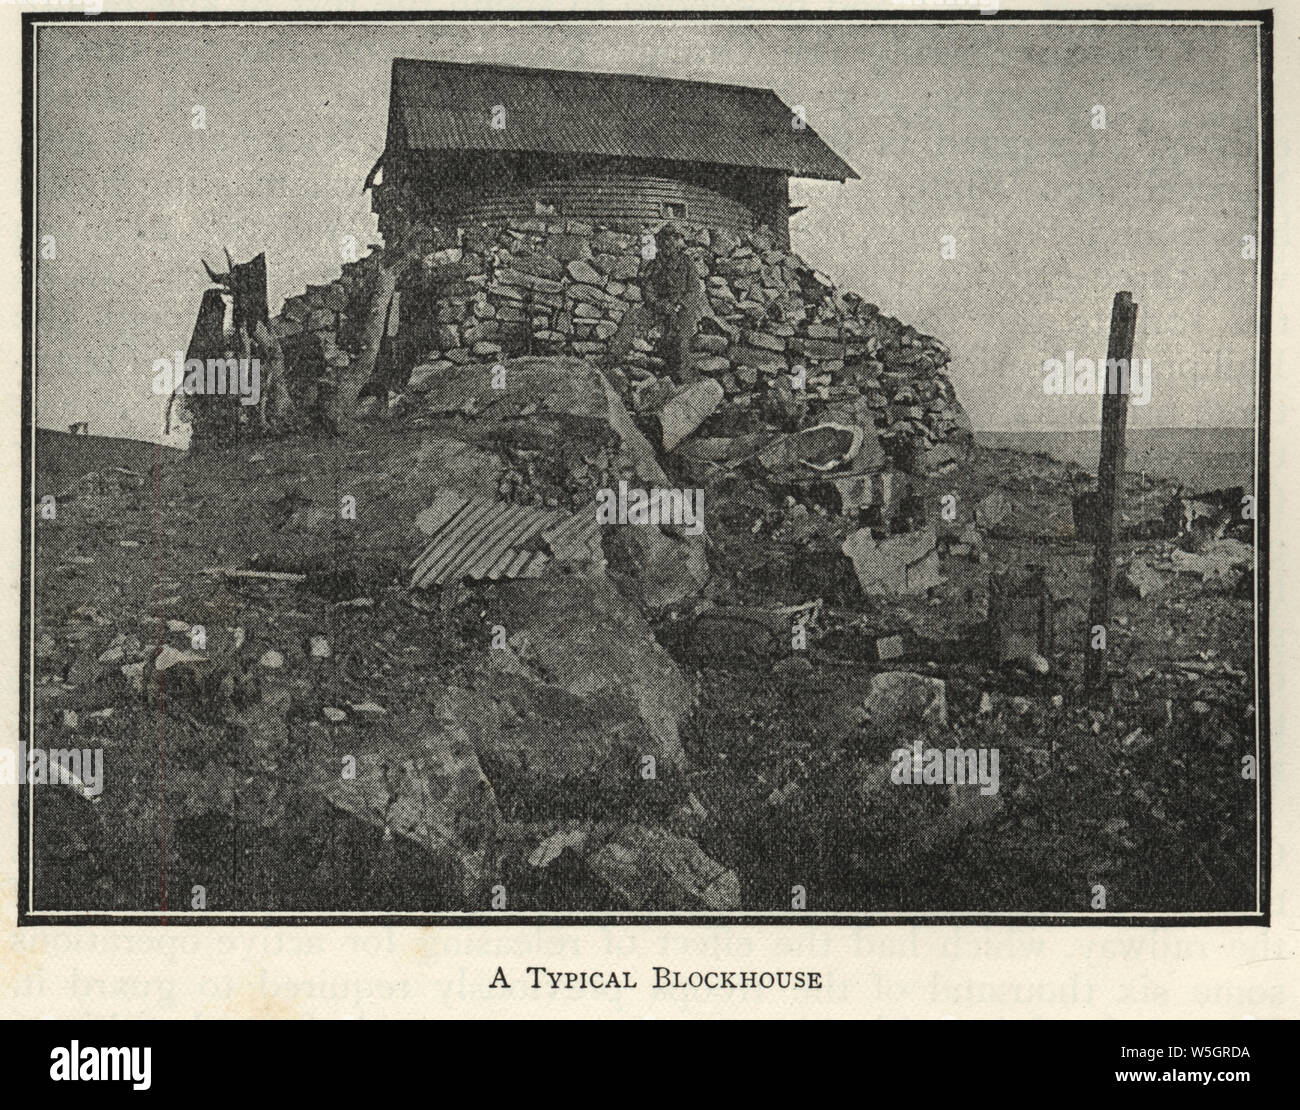 Second Boer War, British blockhouse made of Corrugated iron and stone. In military science, a blockhouse is a small fortification, usually consisting of one or more rooms with loopholes, allowing its defenders to fire in various directions Stock Photo